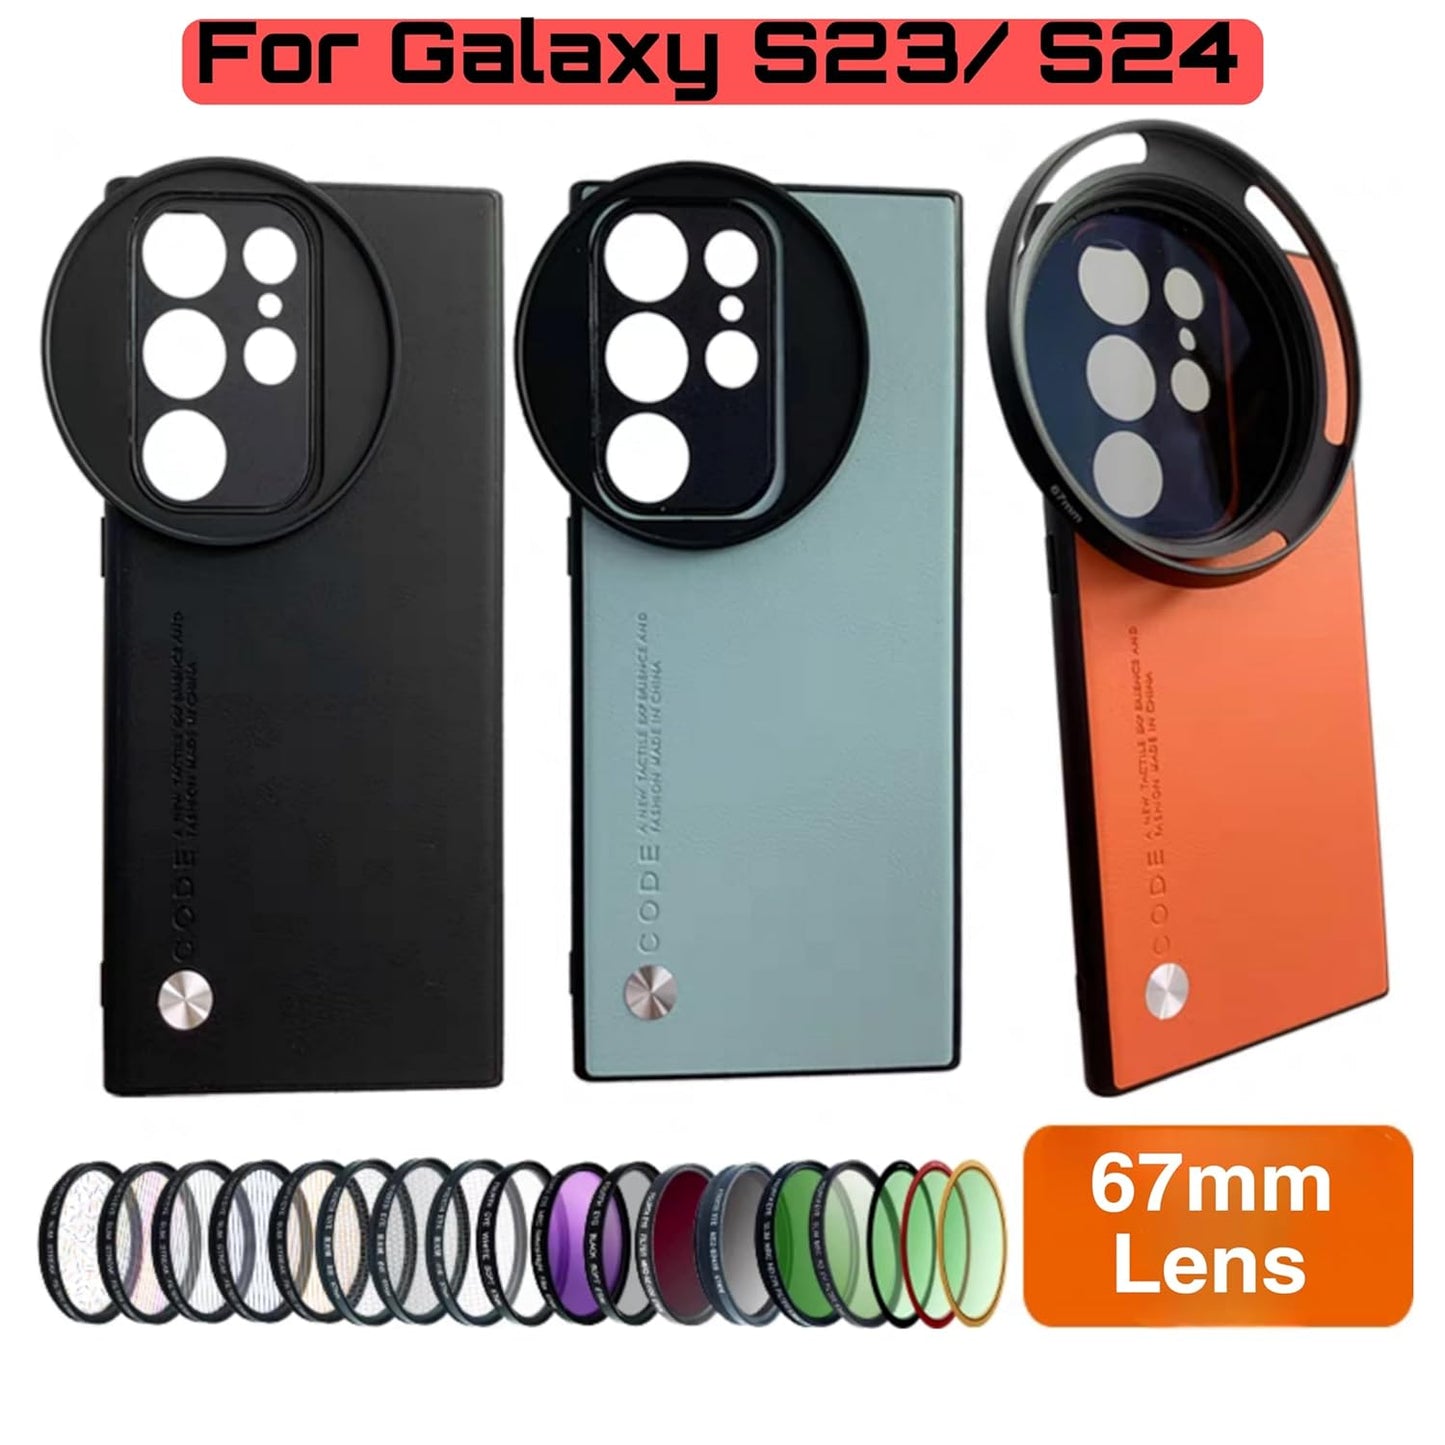 67mm UV Filters Lens For Samsung Galaxy Ultra S22, S23, S24 Mobile Cover, DSLR Camera Nd Filters Accessories 